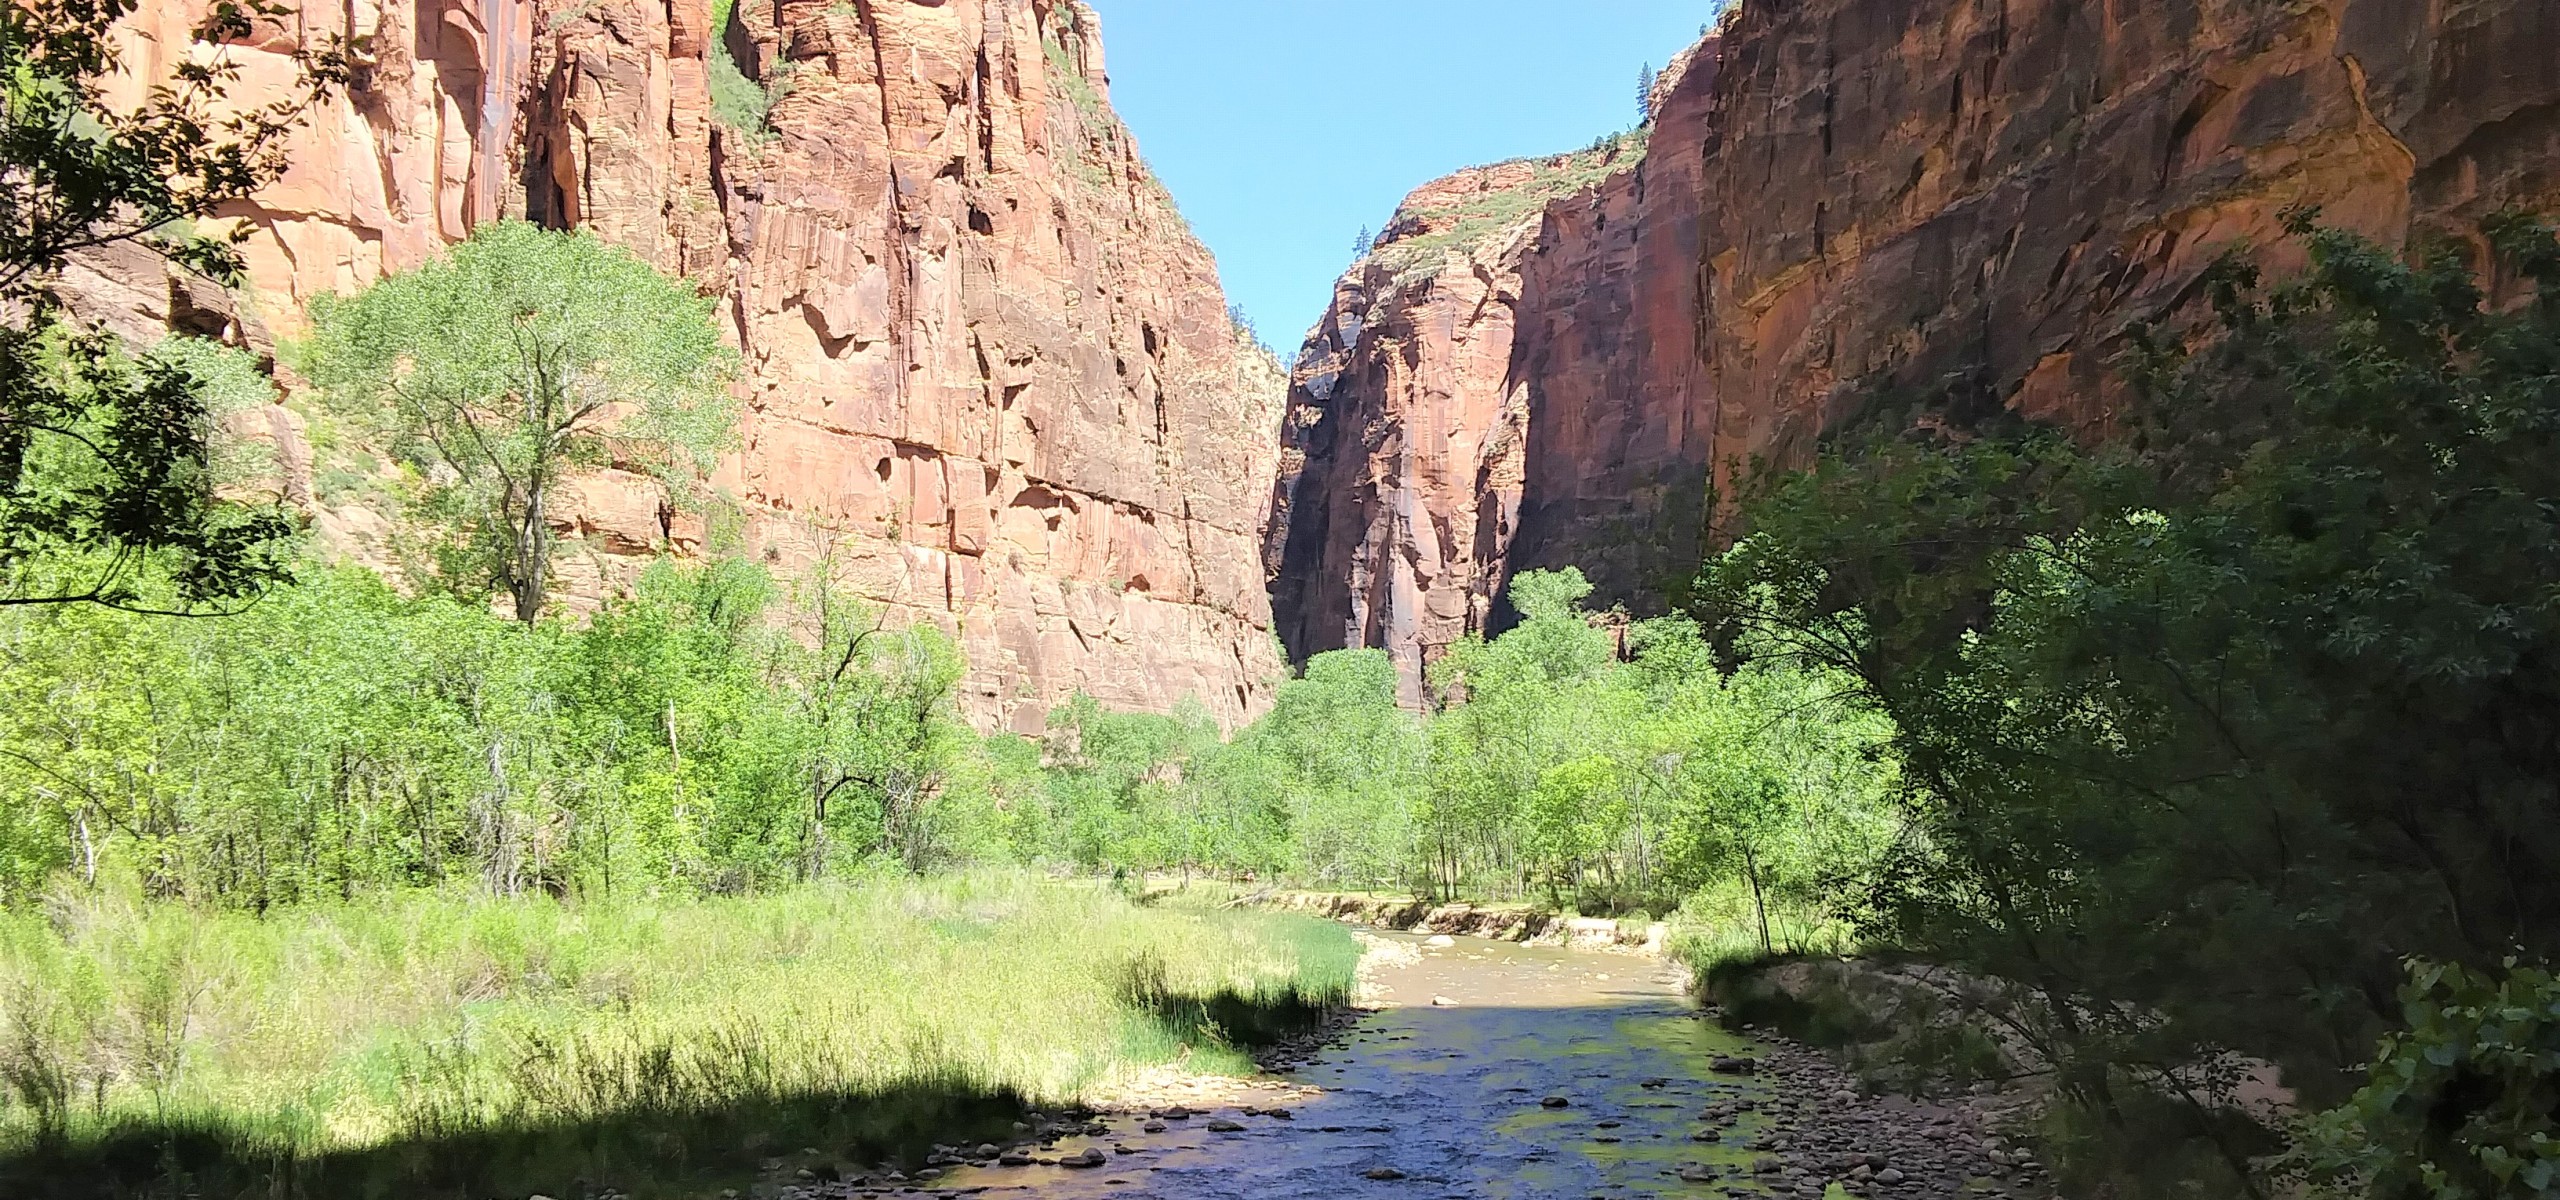 Zion National Park Travel Guide